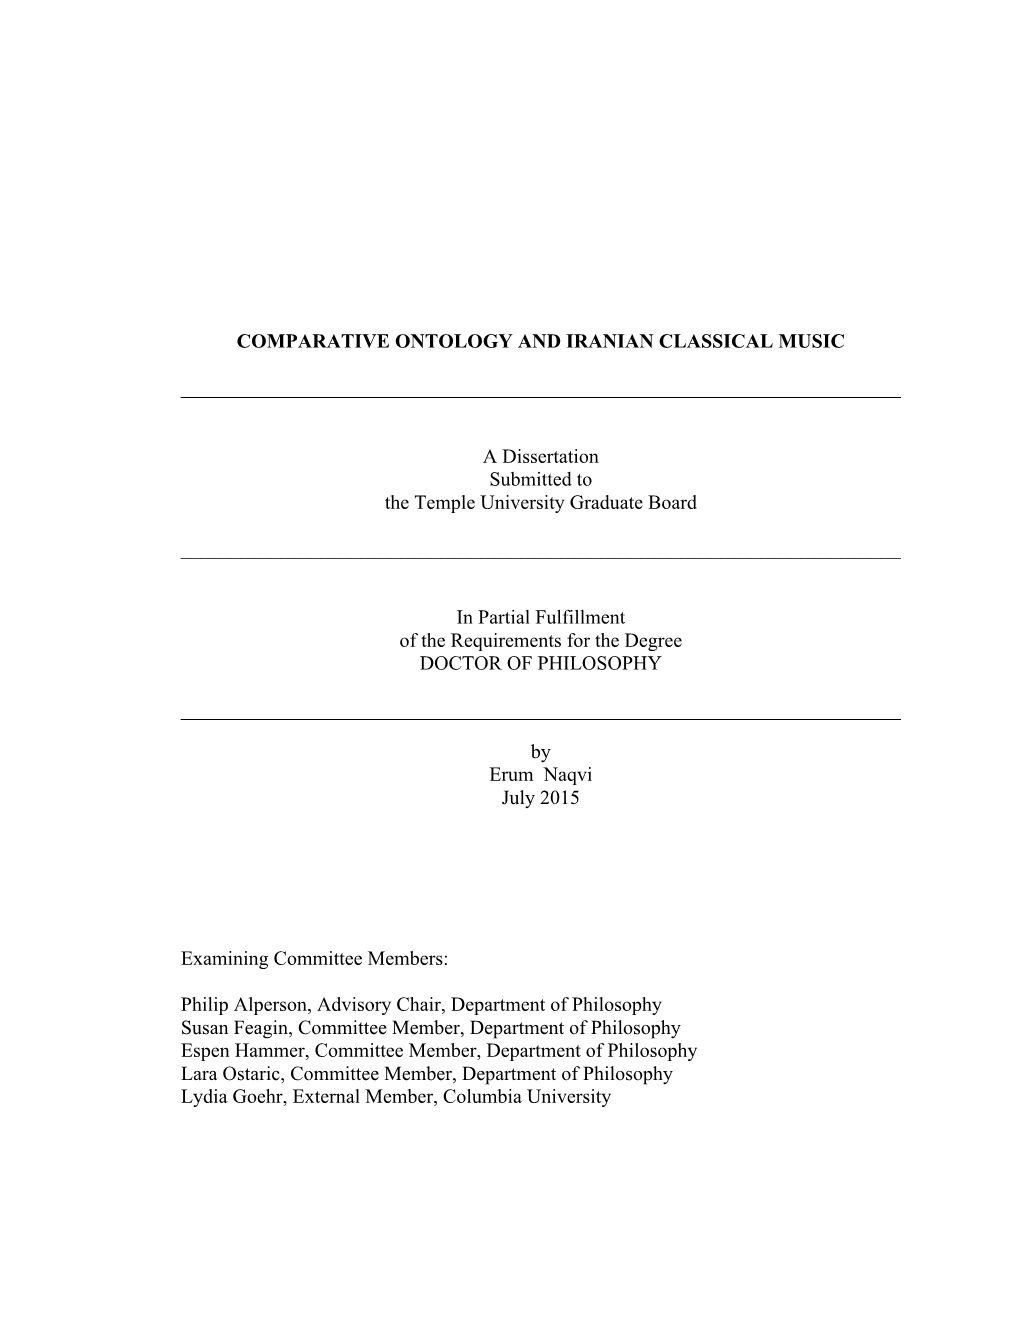 Comparative Ontology and Iranian Classical Music